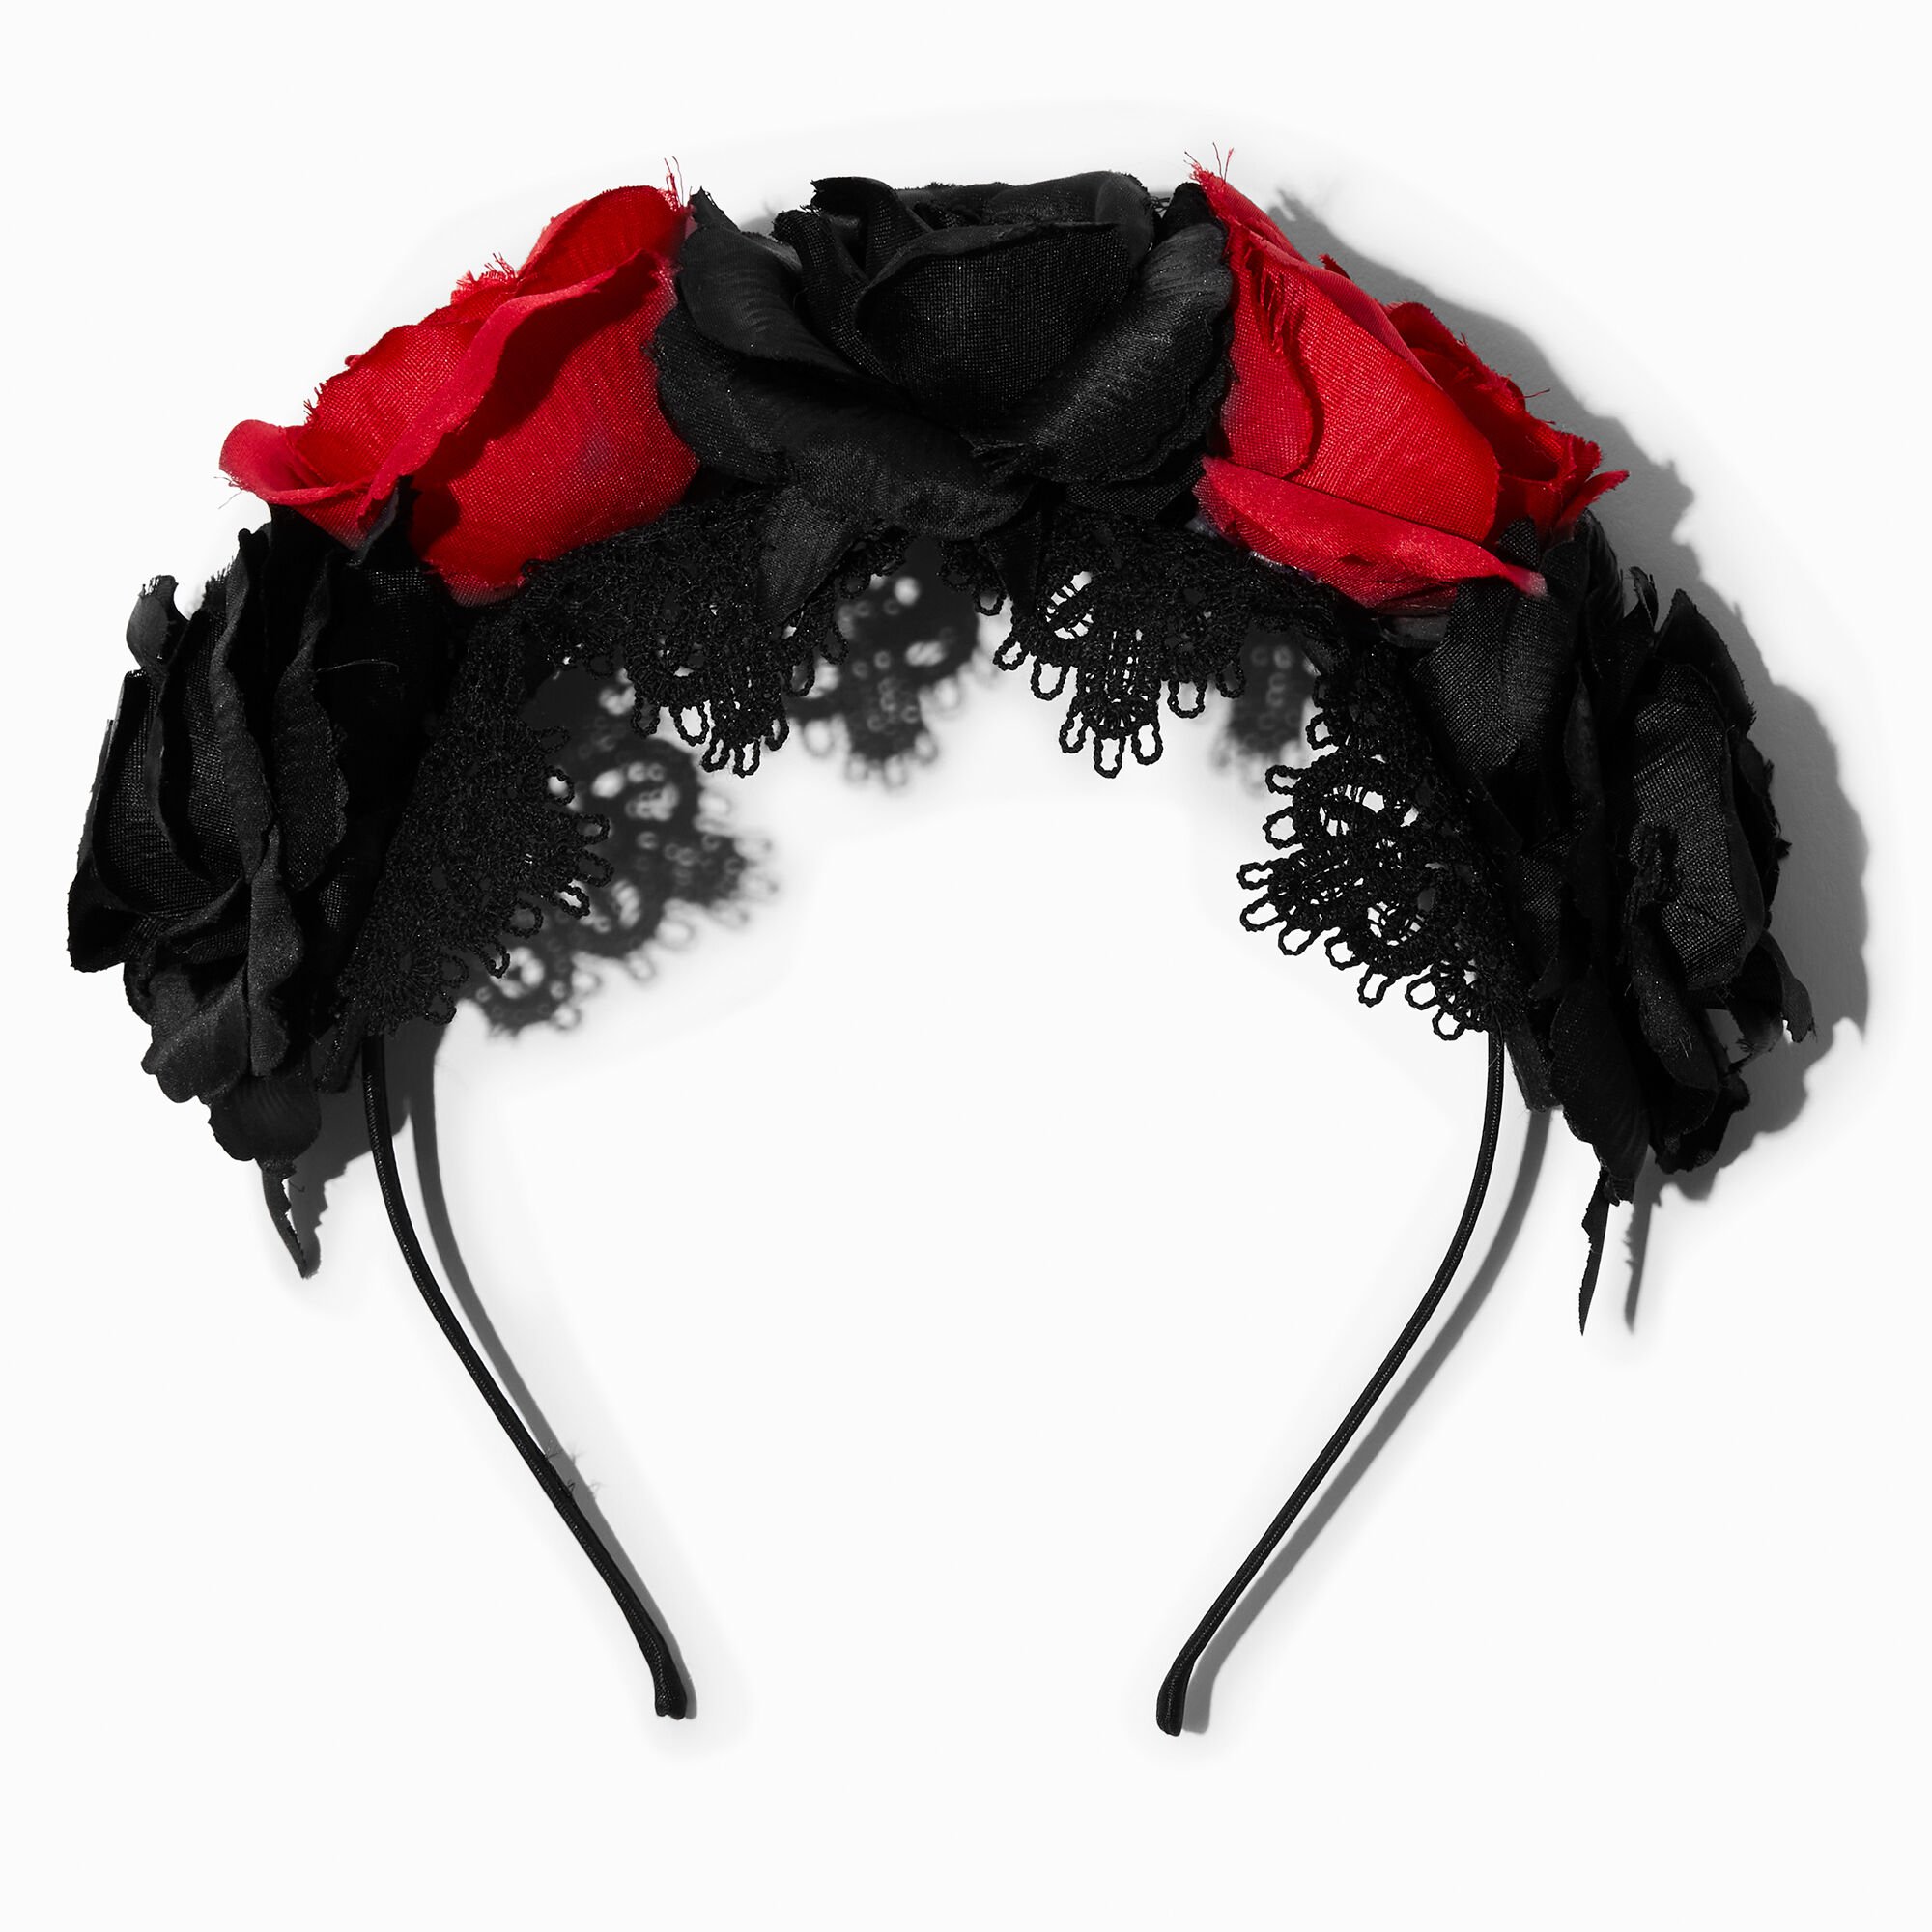 View Claires Black Roses Headband Red information